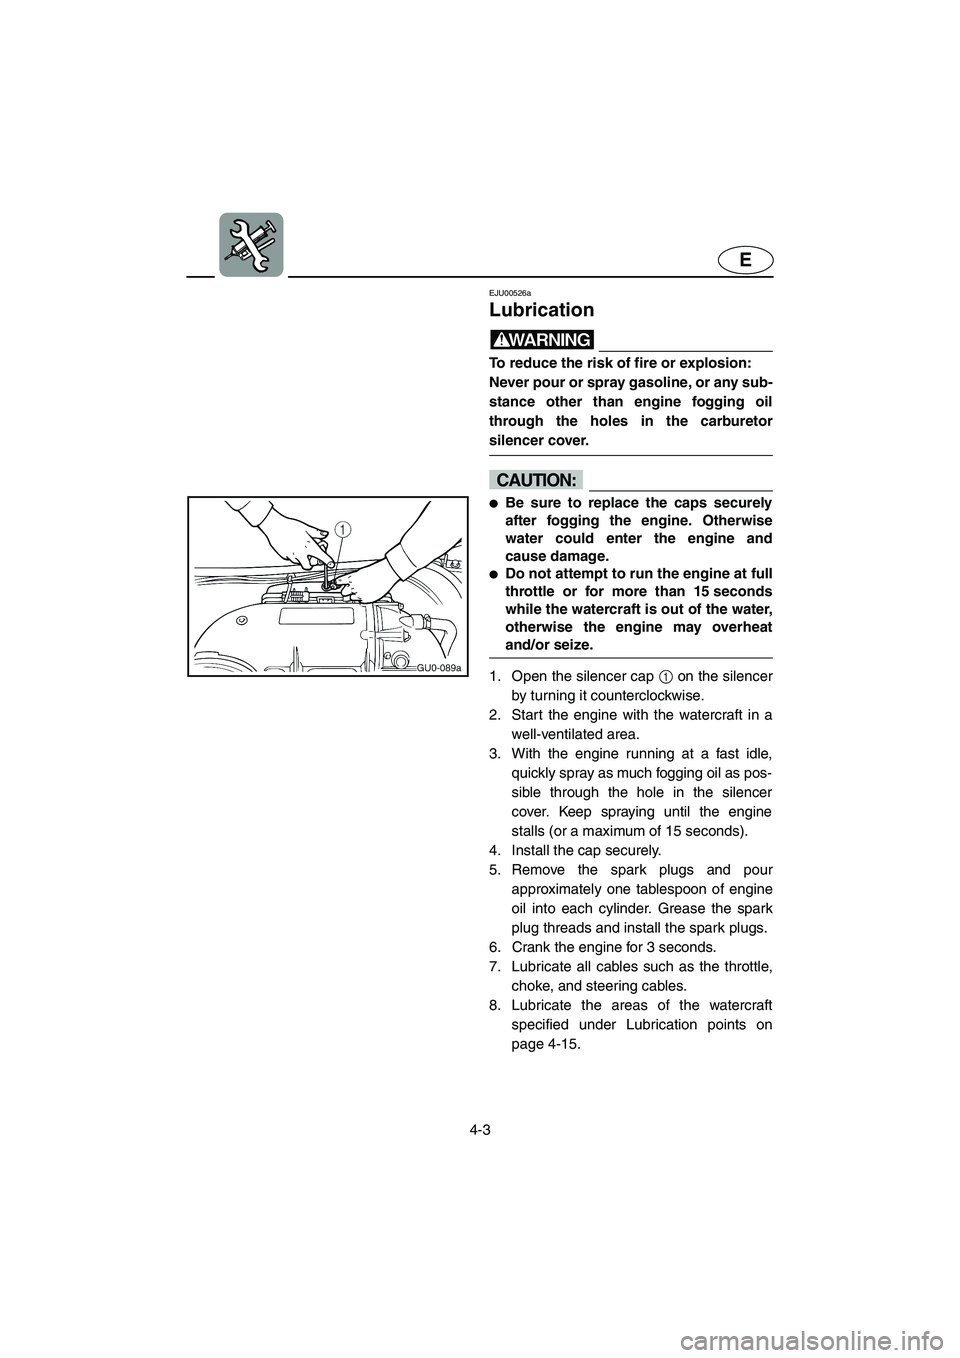 YAMAHA XL 800 2001  Owners Manual 4-3
E
EJU00526a
Lubrication
WARNING
To reduce the risk of fire or explosion:
Never pour or spray gasoline, or any sub-
stance other than engine fogging oil
through the holes in the carburetor
silencer